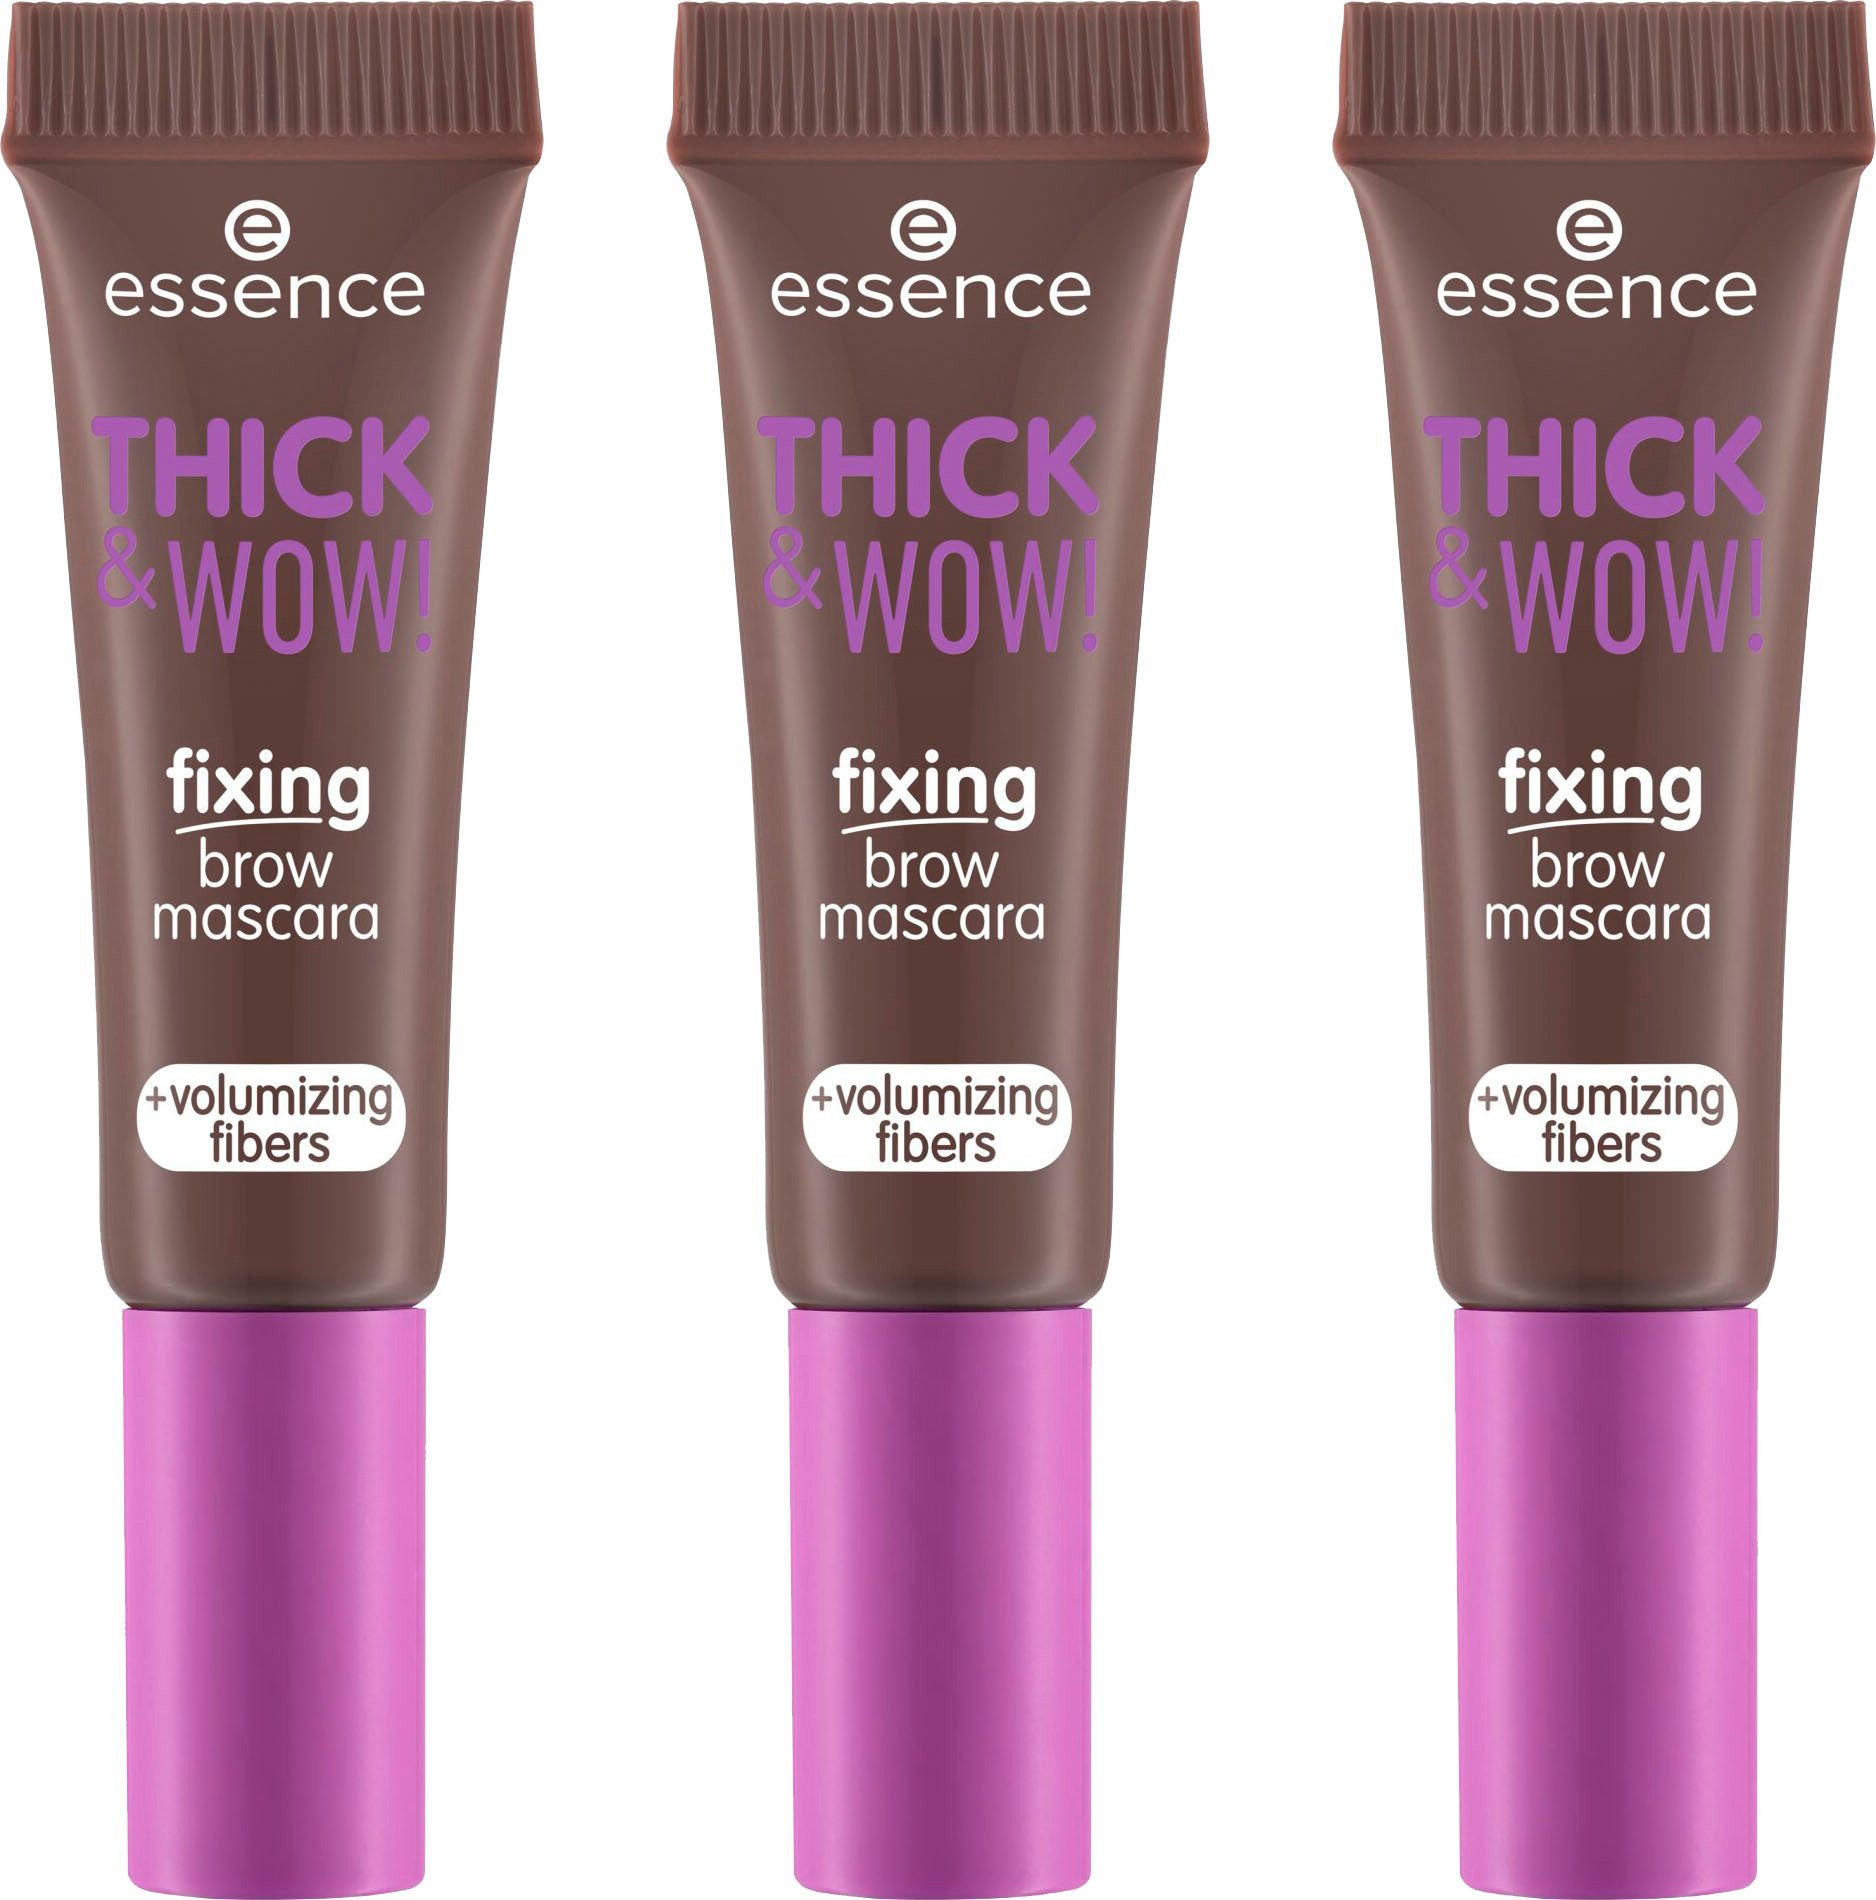 Essence Augenbrauen-Gel THICK & WOW! fixing brow mascara, 3-tlg.